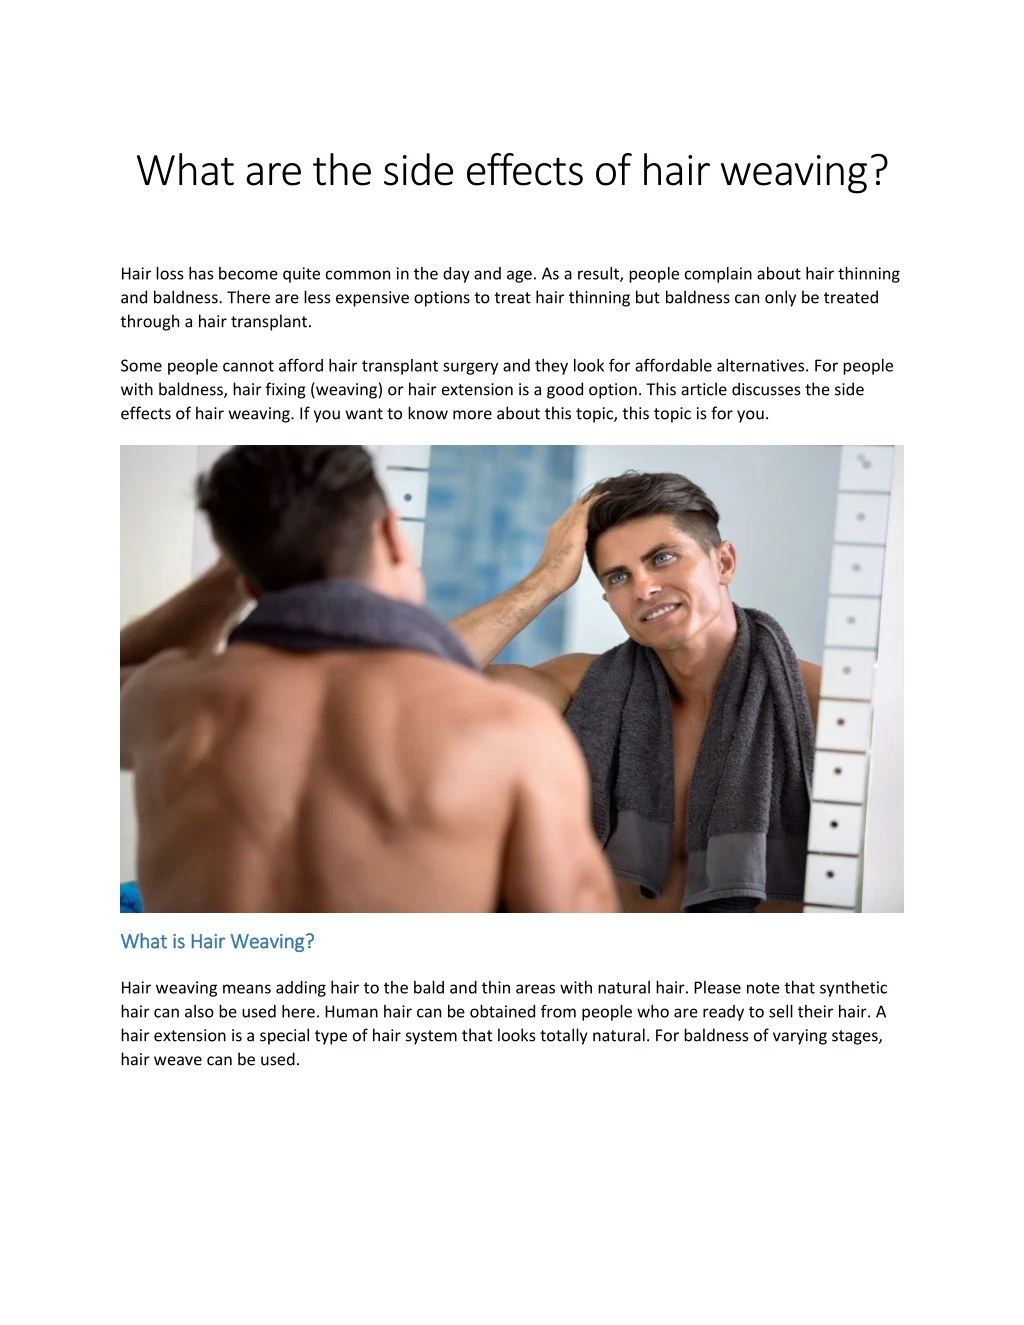 what are the side effects of hair weaving